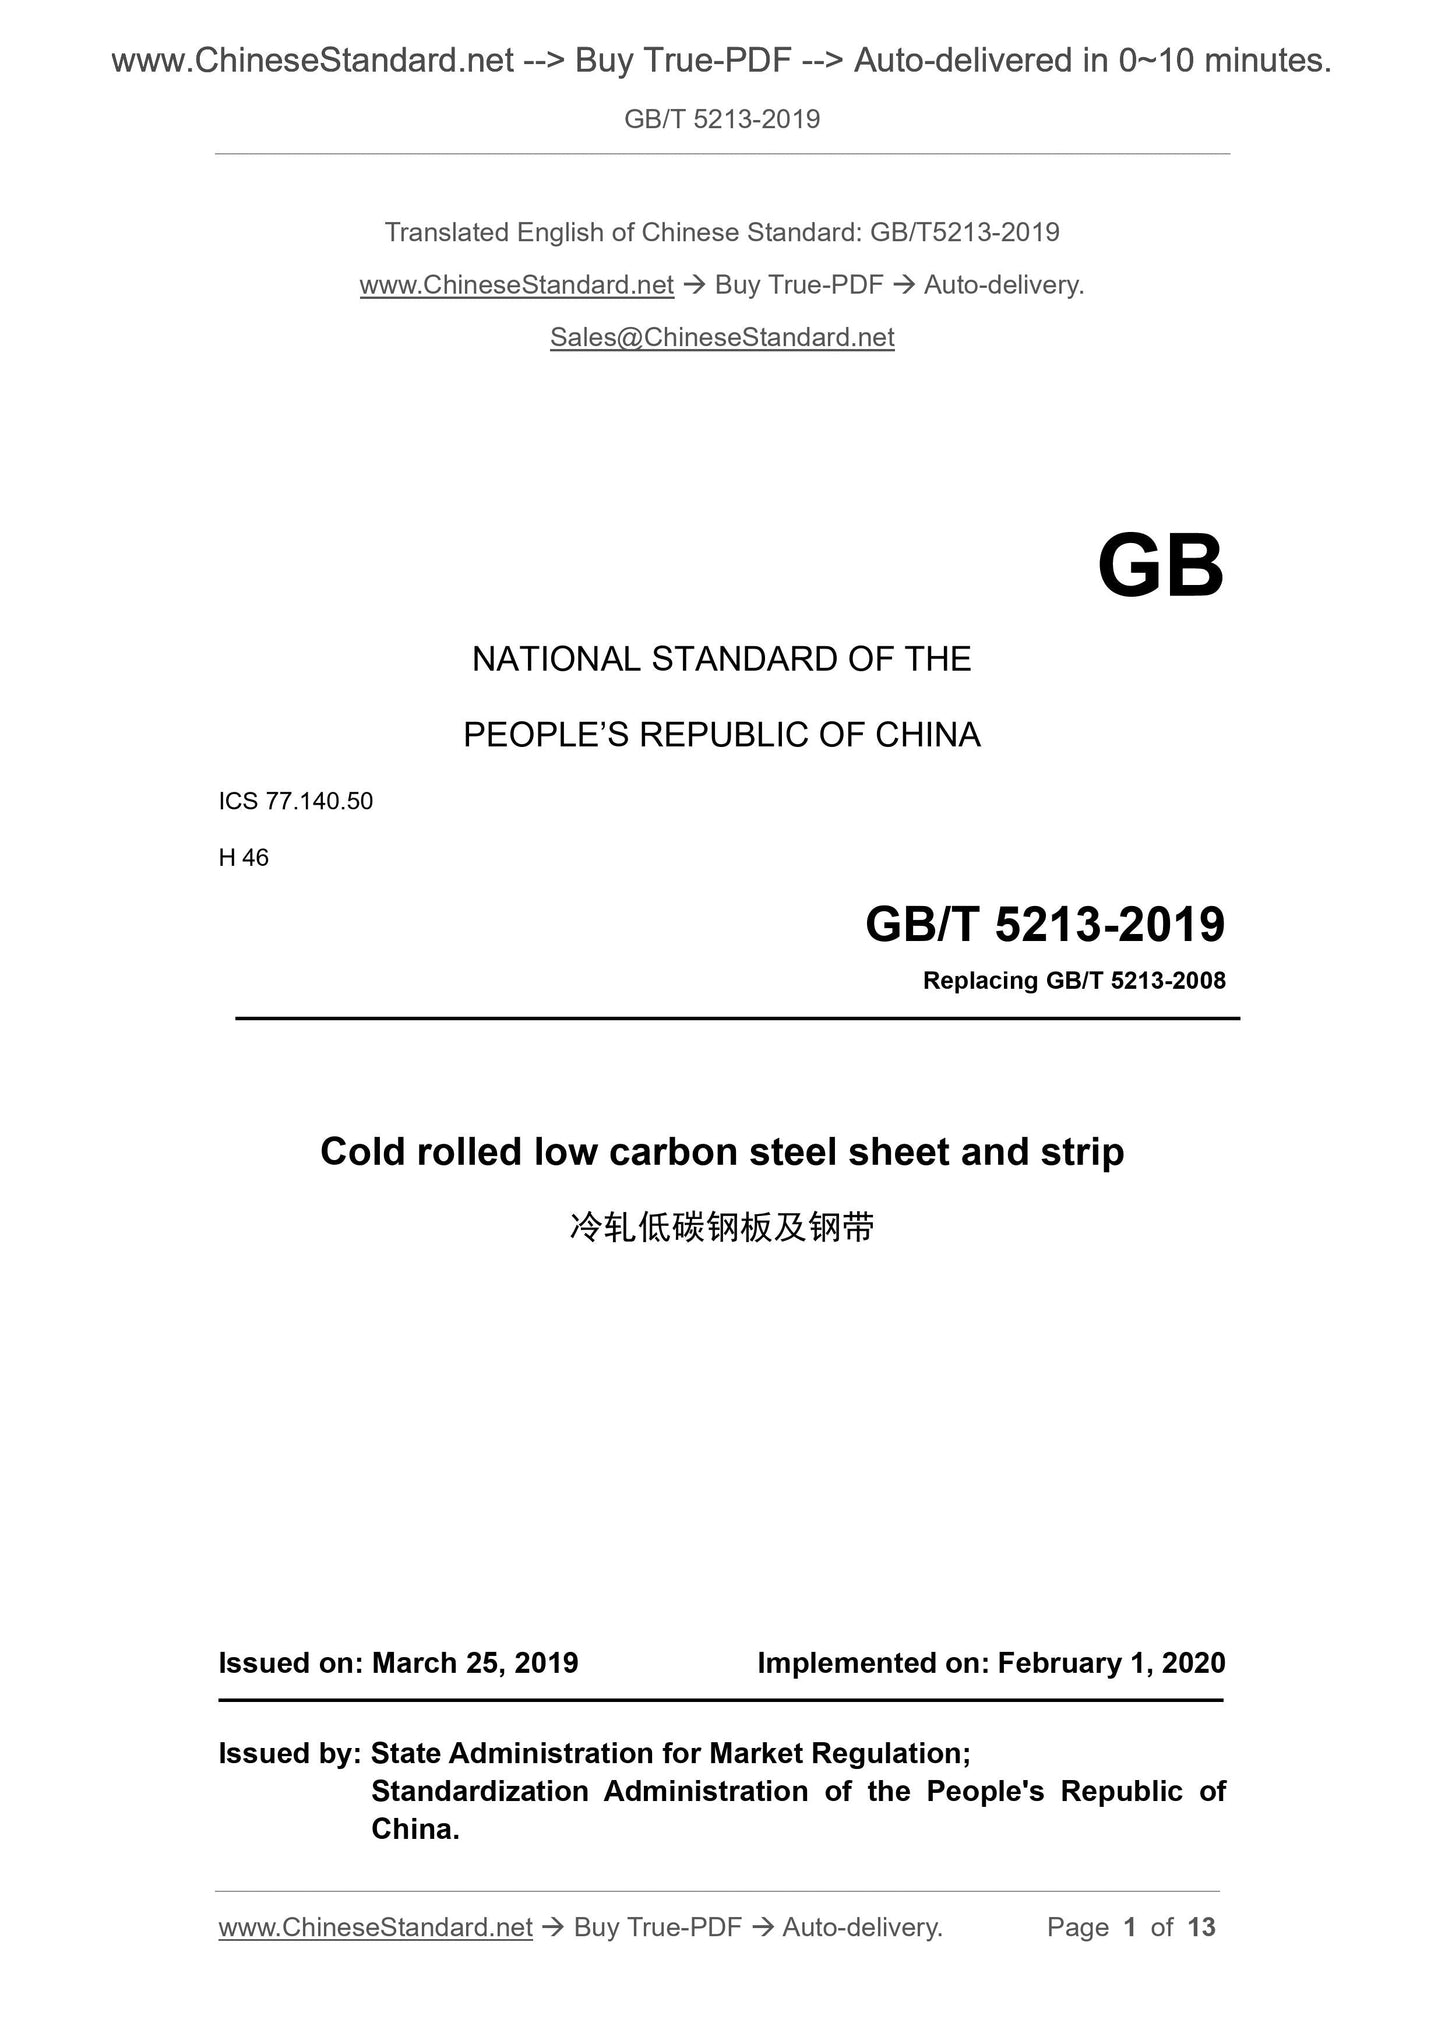 GB/T 5213-2019 Page 1